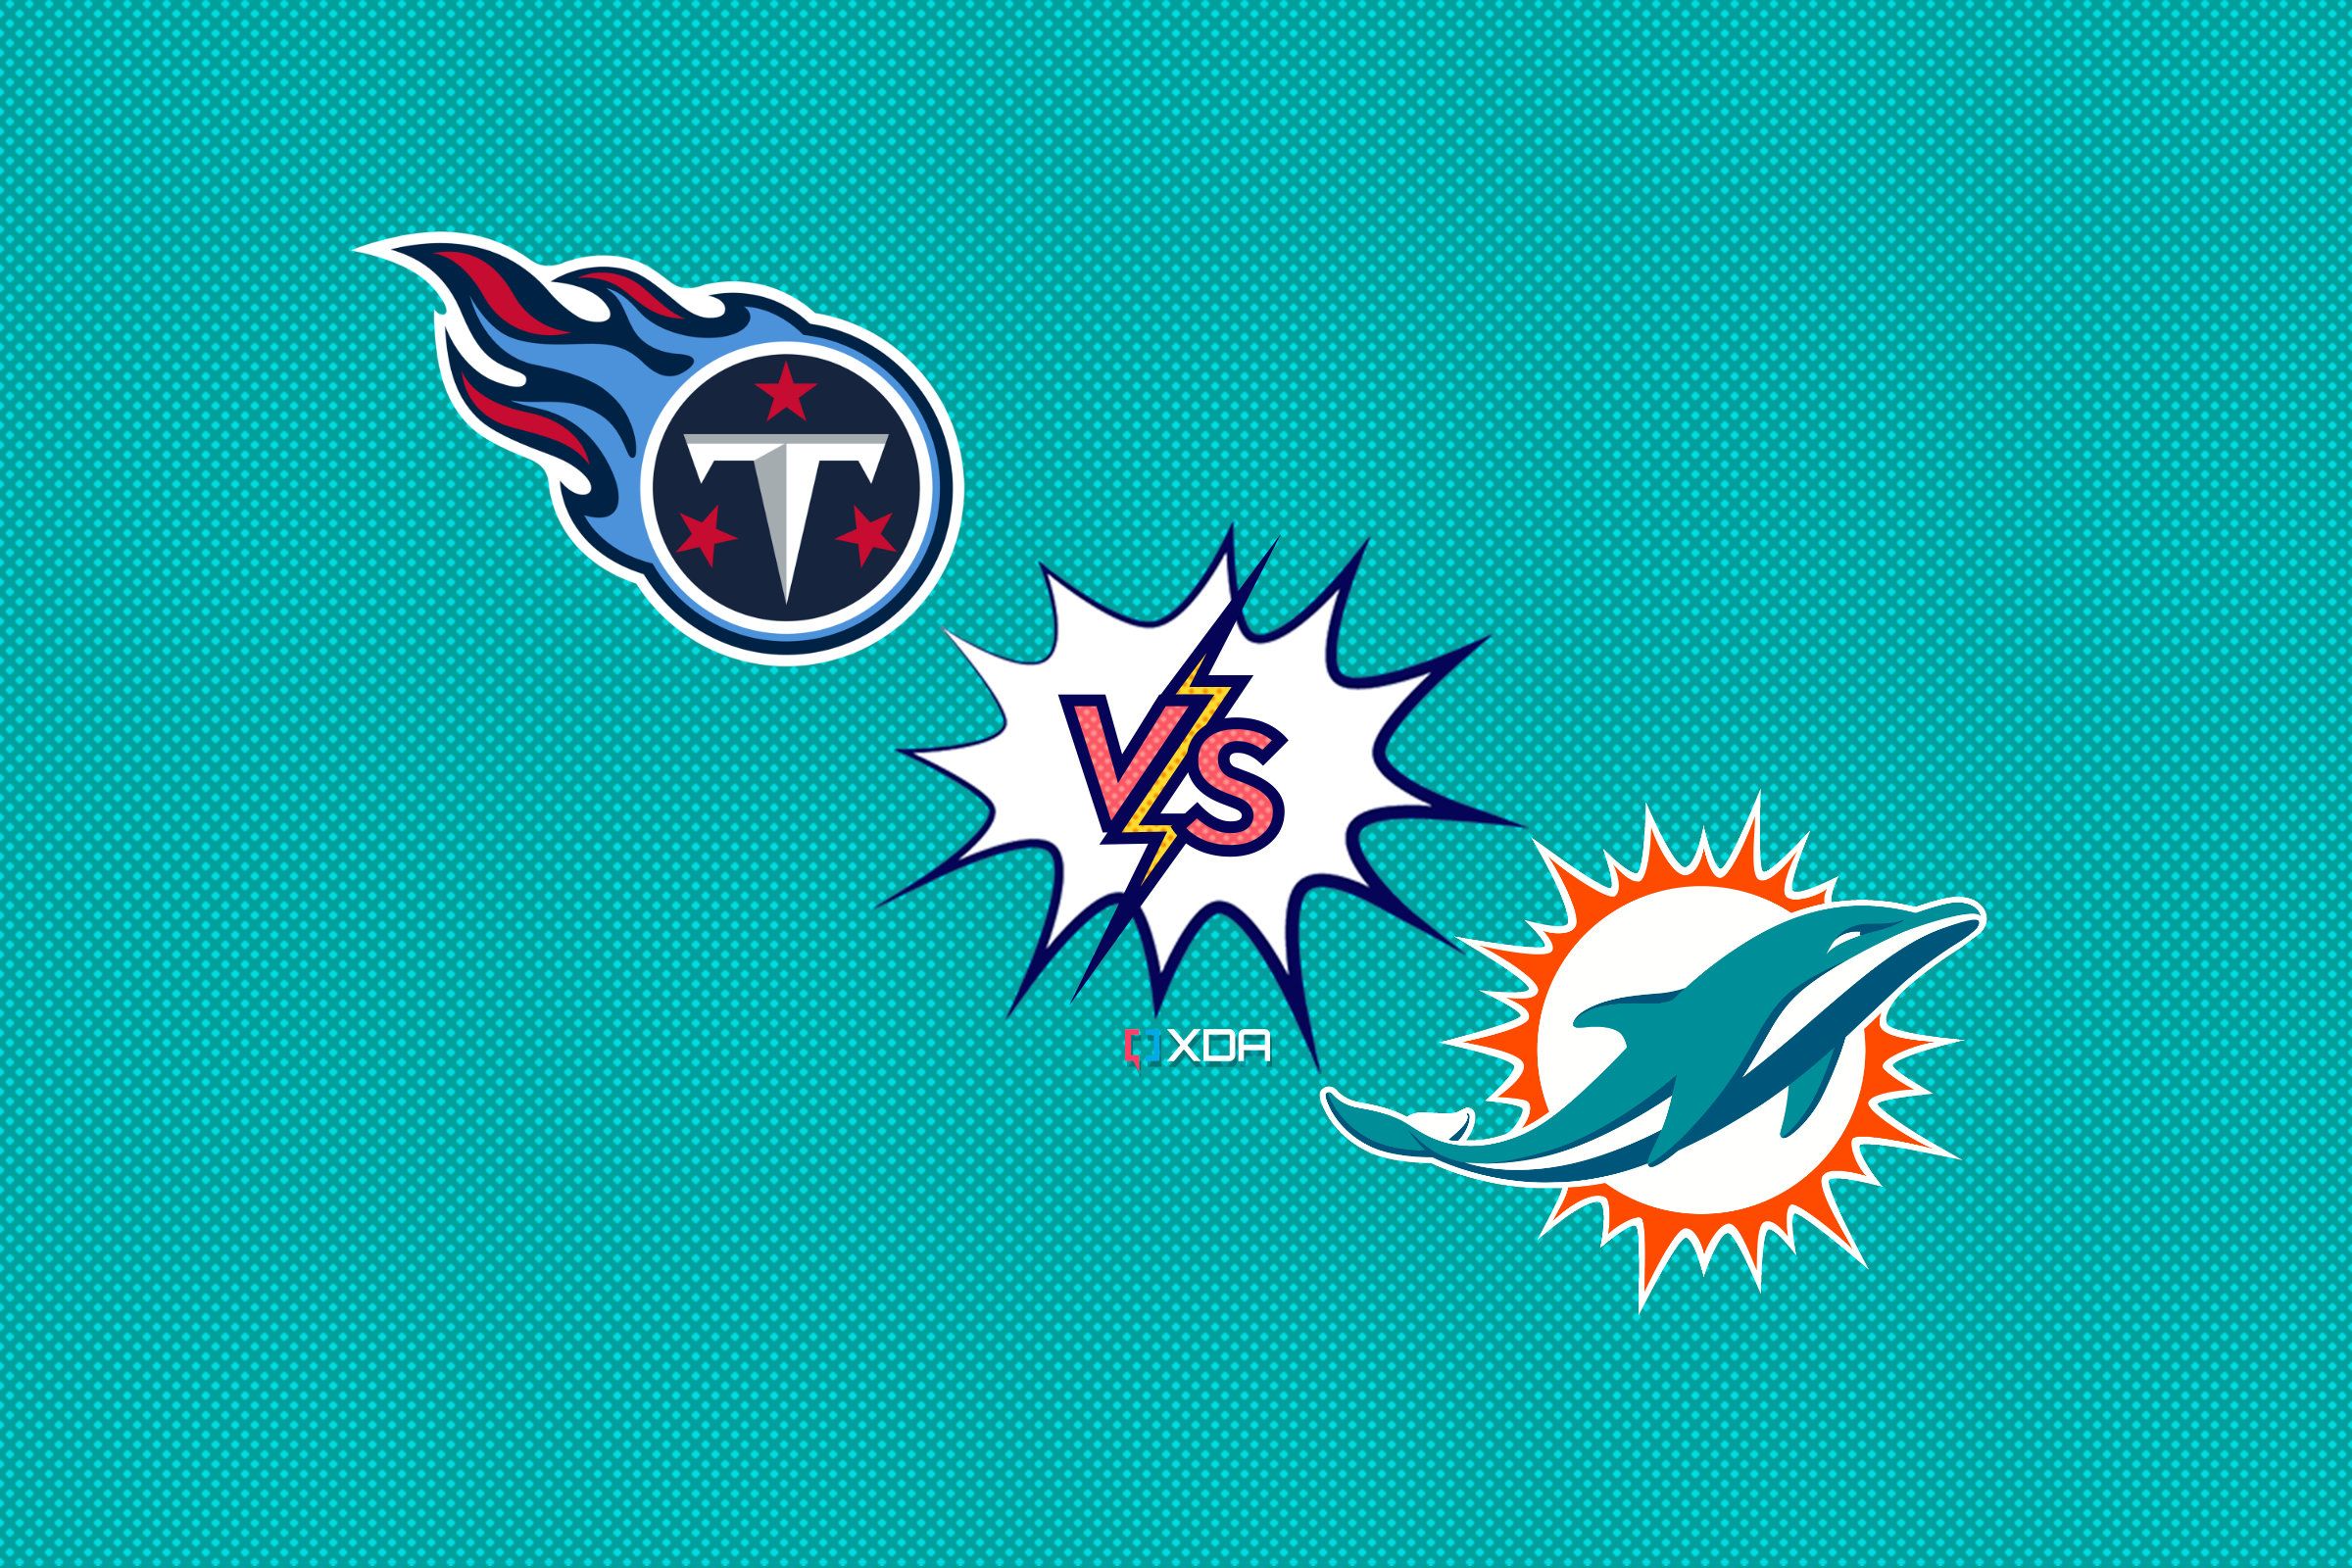 nfl logos of the tennessee titans and miami dolphins with the word vs between them